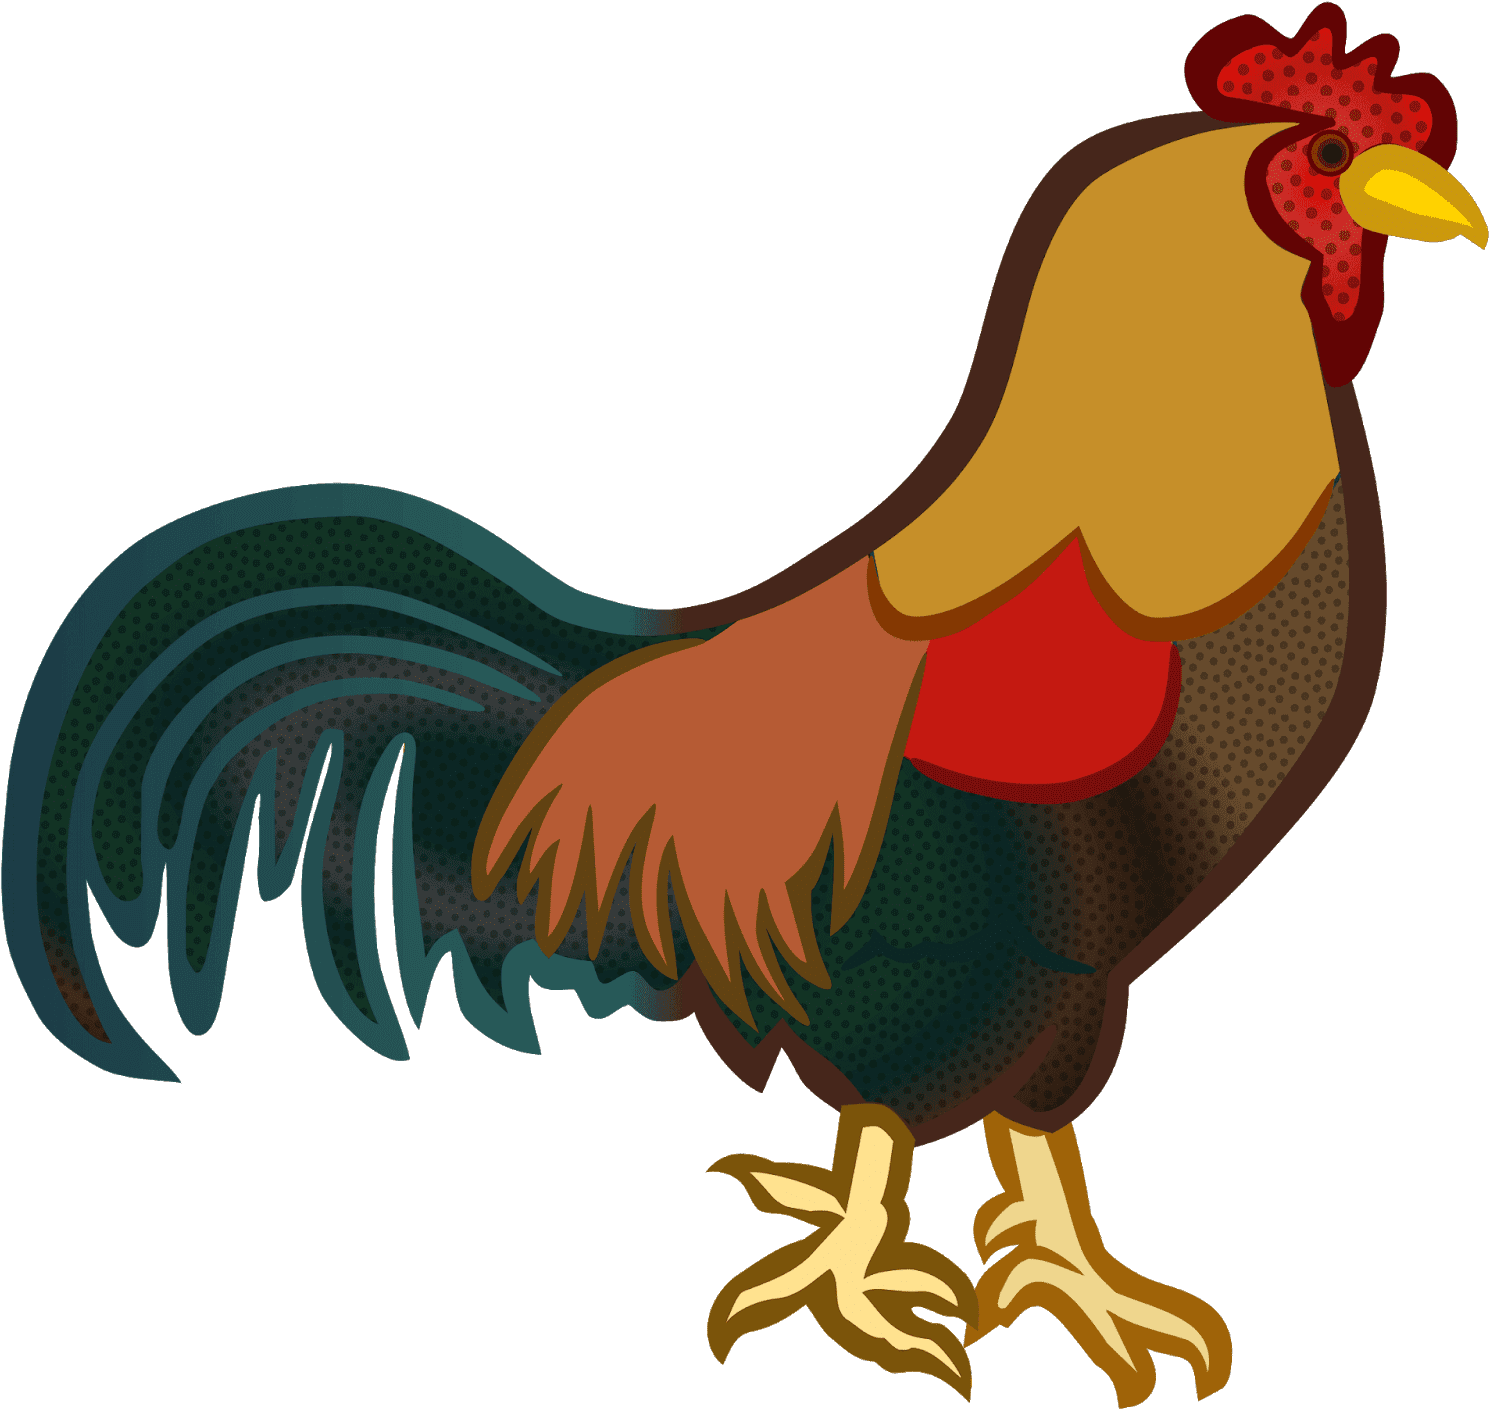 Colorful Rooster Illustration